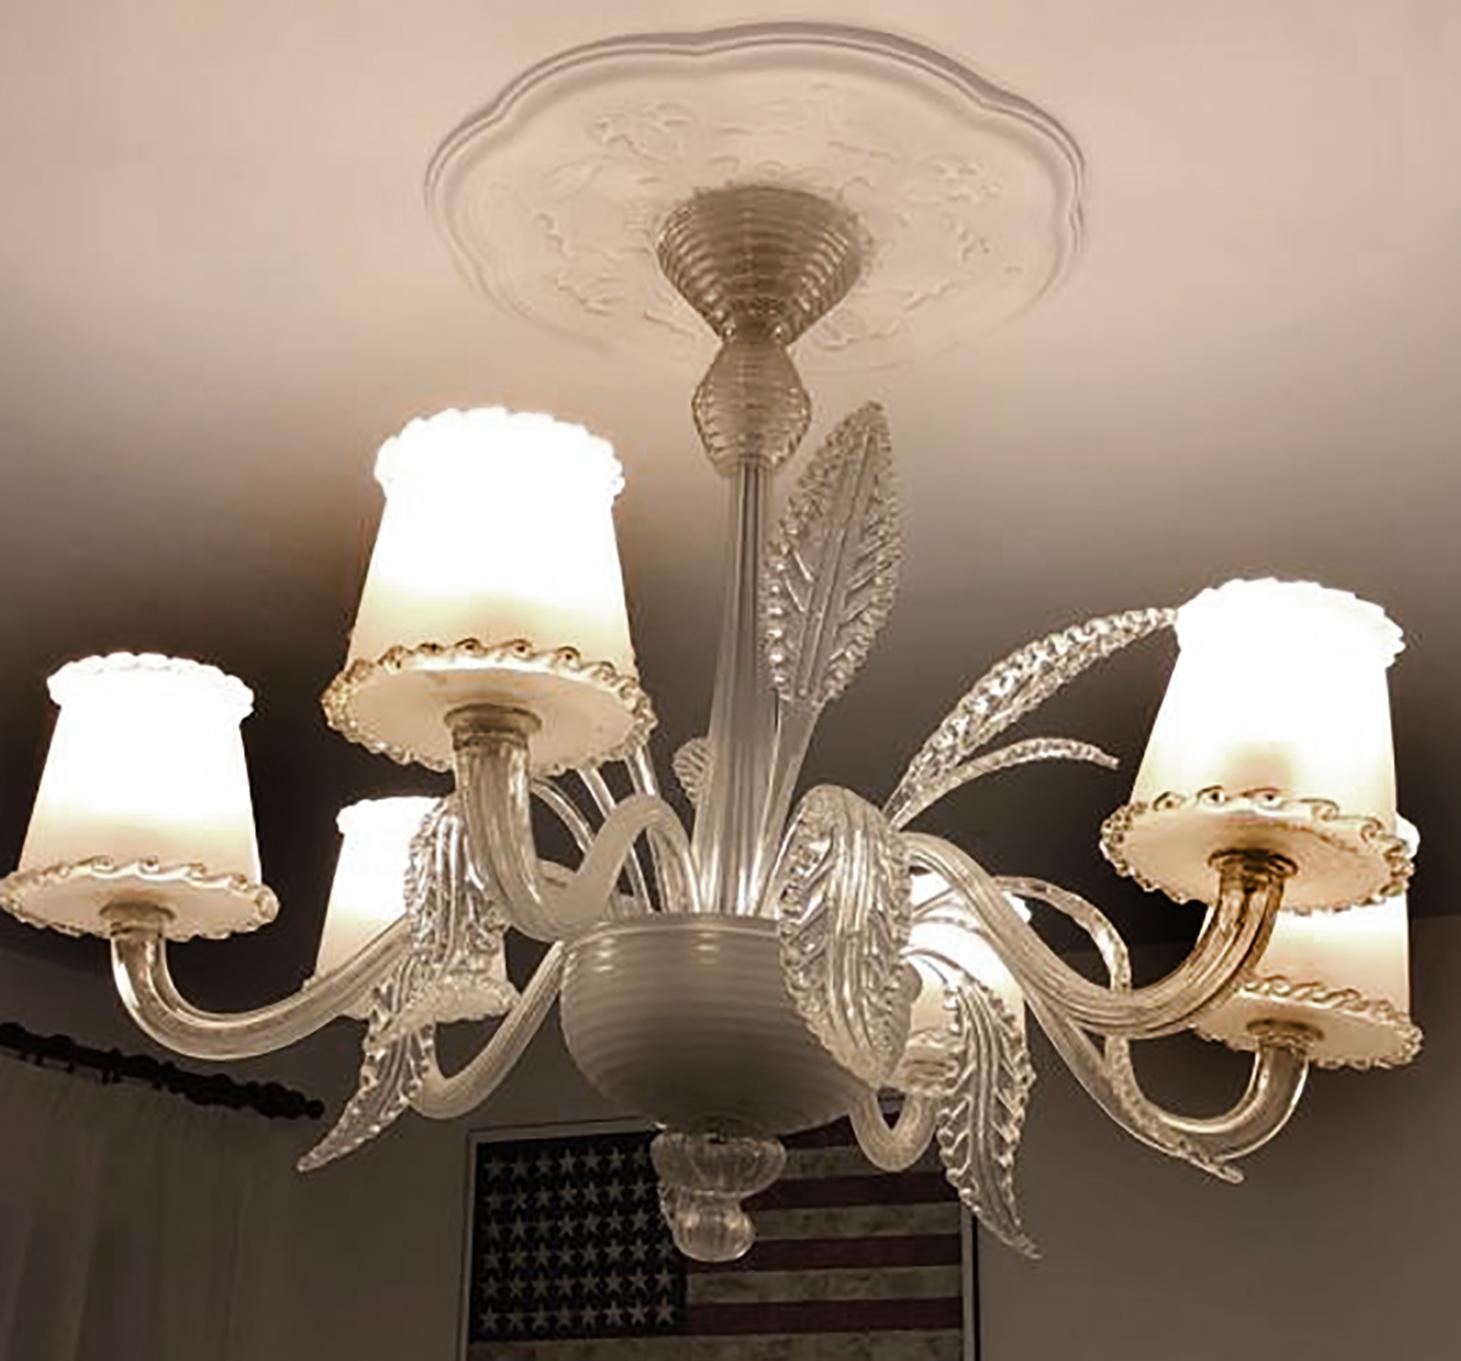 Mid-20th Century Italian Chandelier by Barovier & Toso, Murano, 1940s For Sale 3